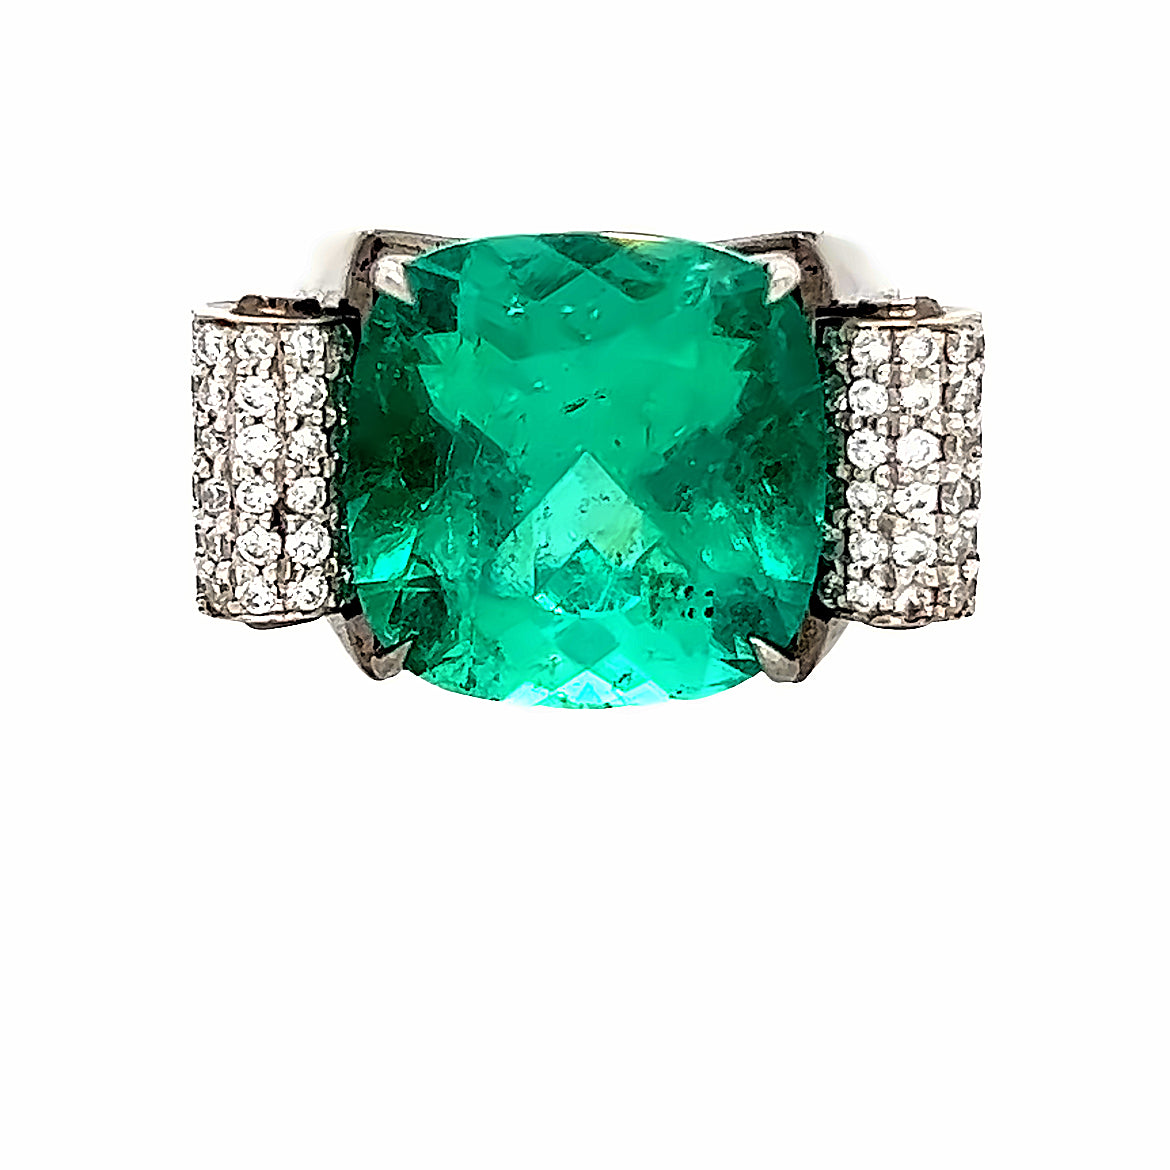 Close up view of the front of the cushion cut emerald engagement ring. The center stone is 10.66 carats. 